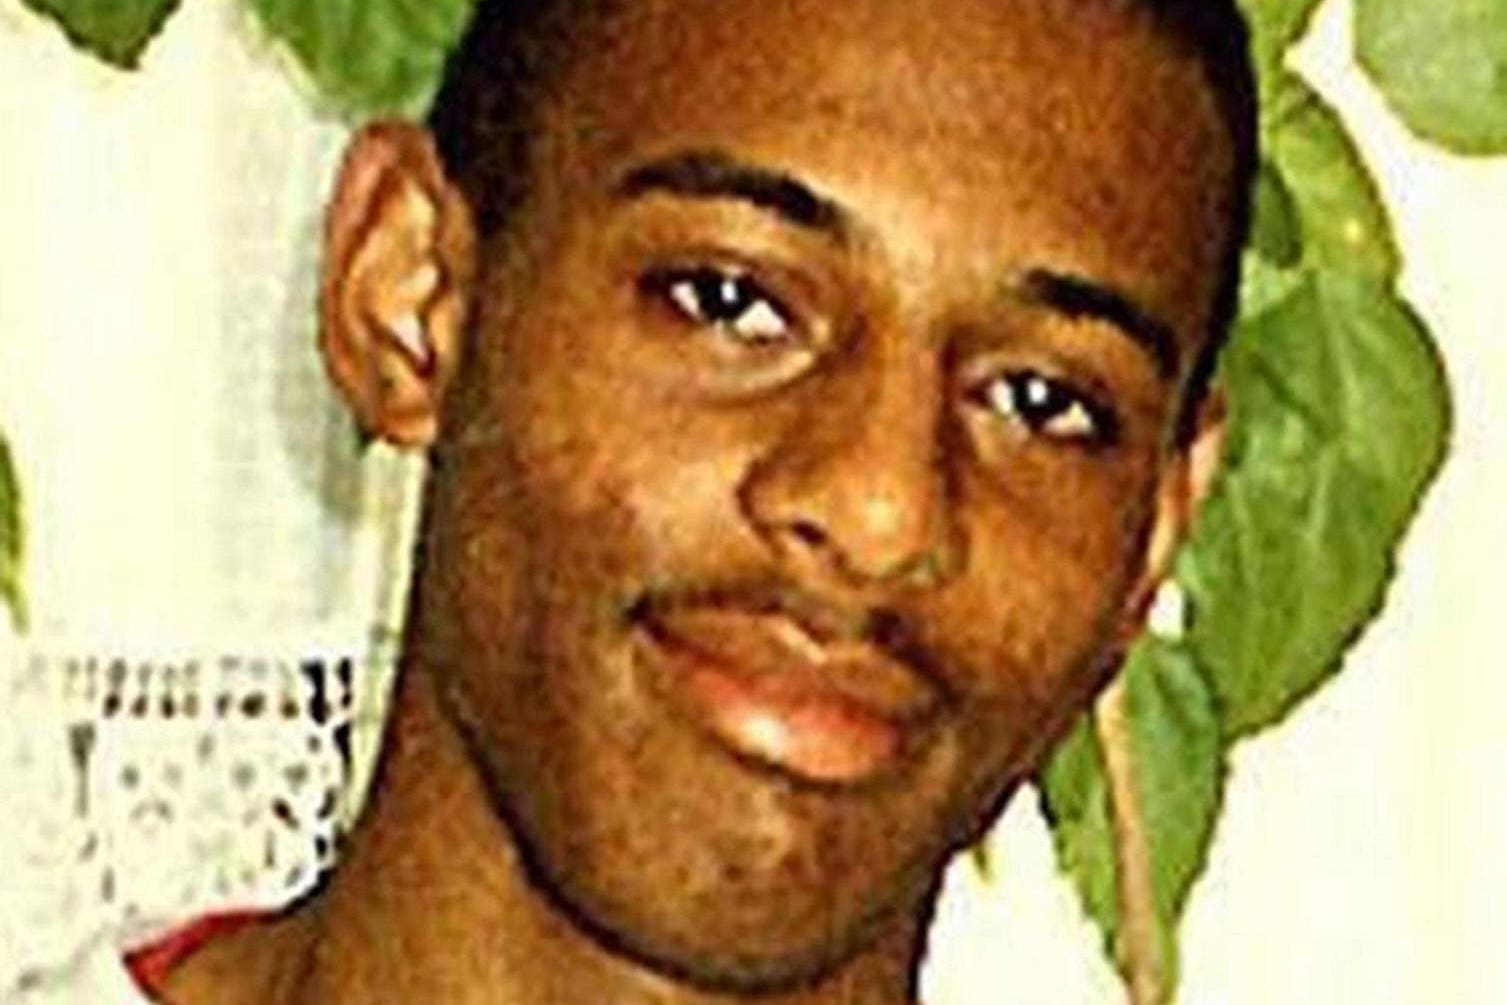 Errors in the early stages of the Stephen Lawrence investigation were so bad they are irreparable, the head of the Metropolitan Police has said (Family handout/PA)